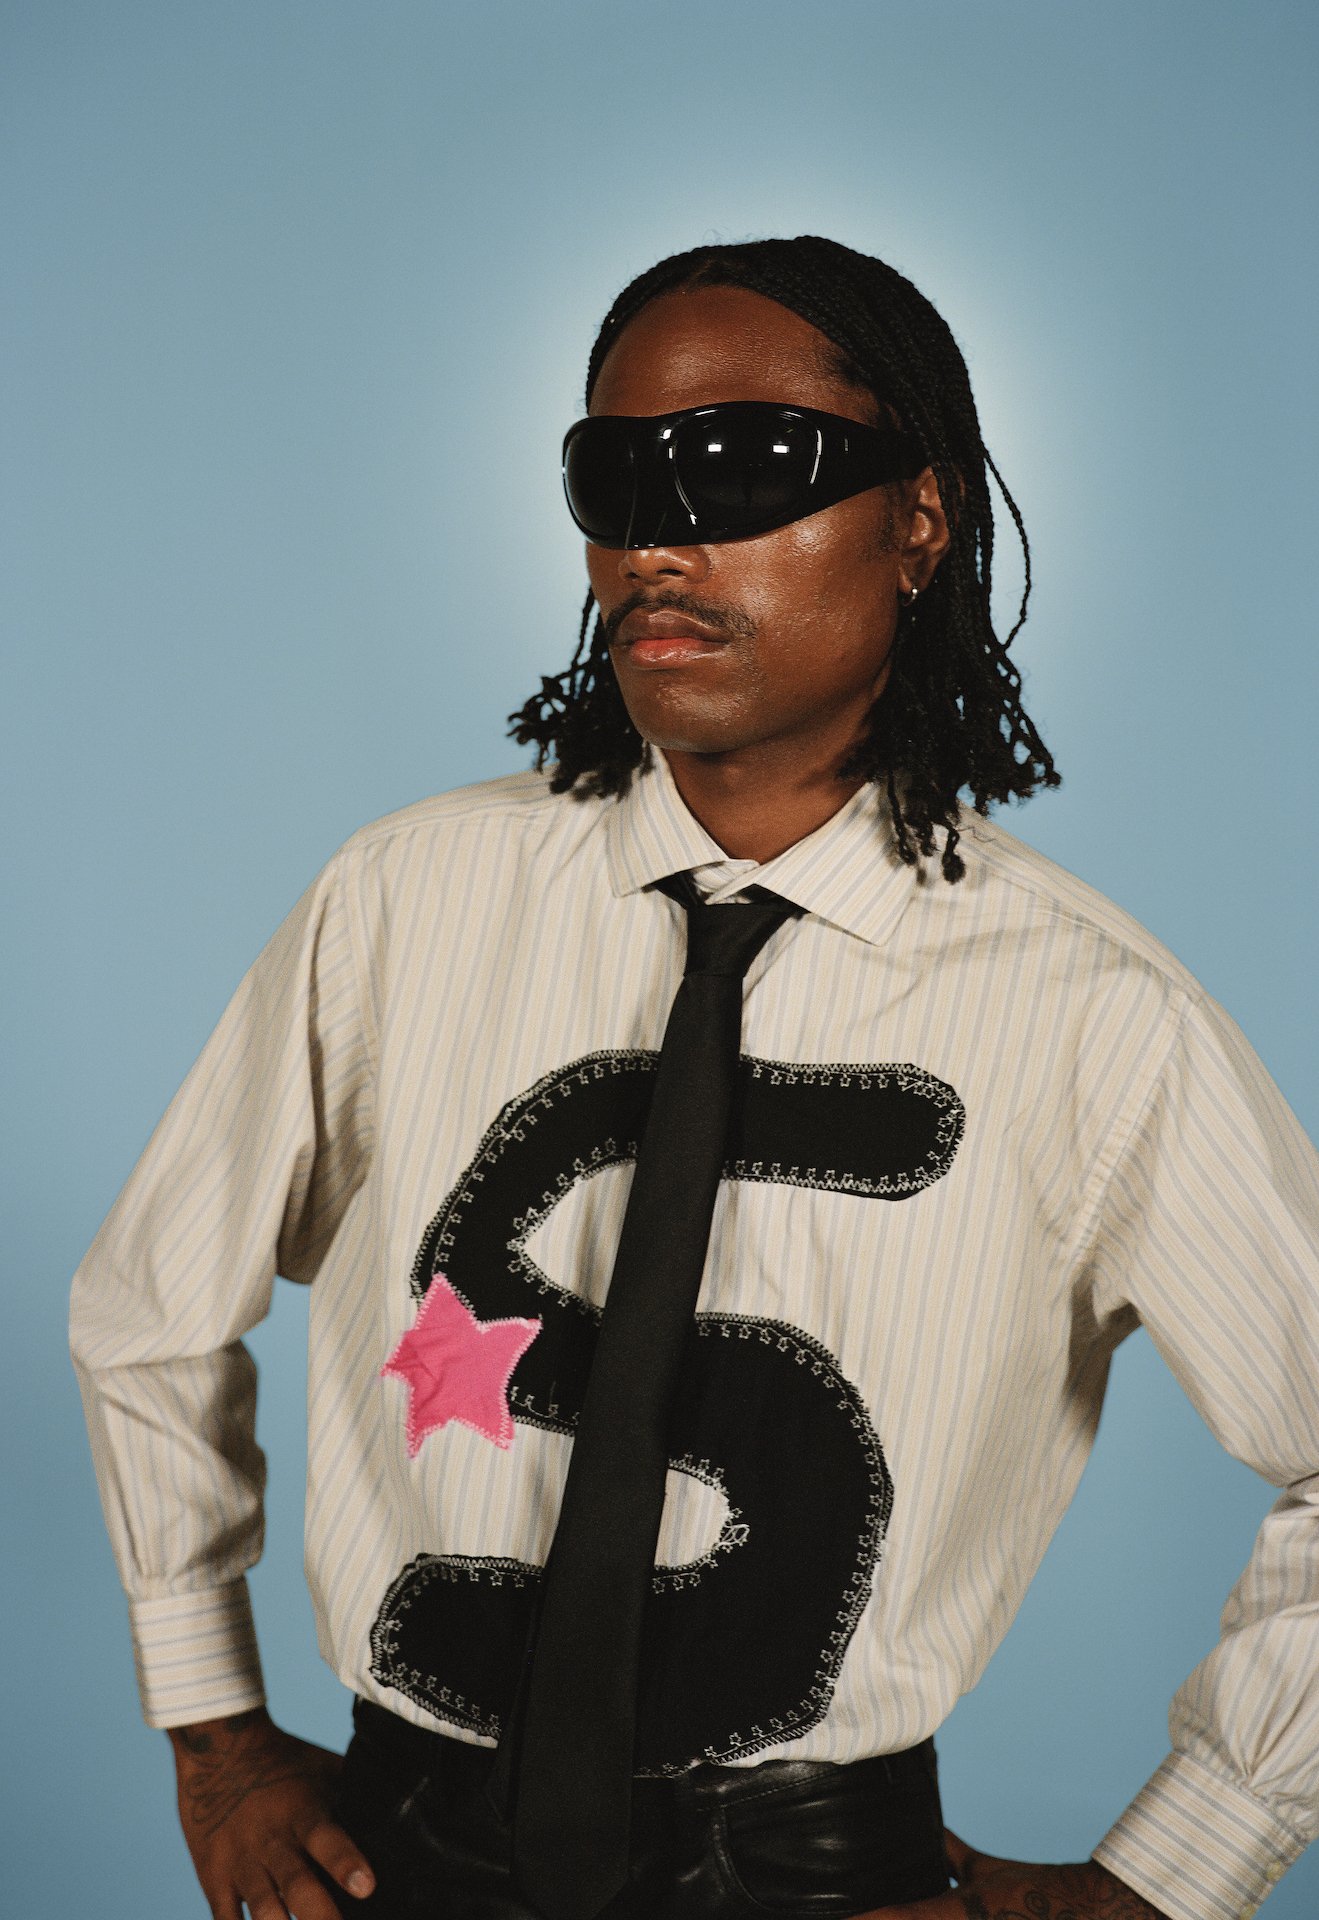 Steve Lacy, wearing dark glasses and a shirt with a giant dollar sign, faces the camera against a blue wall